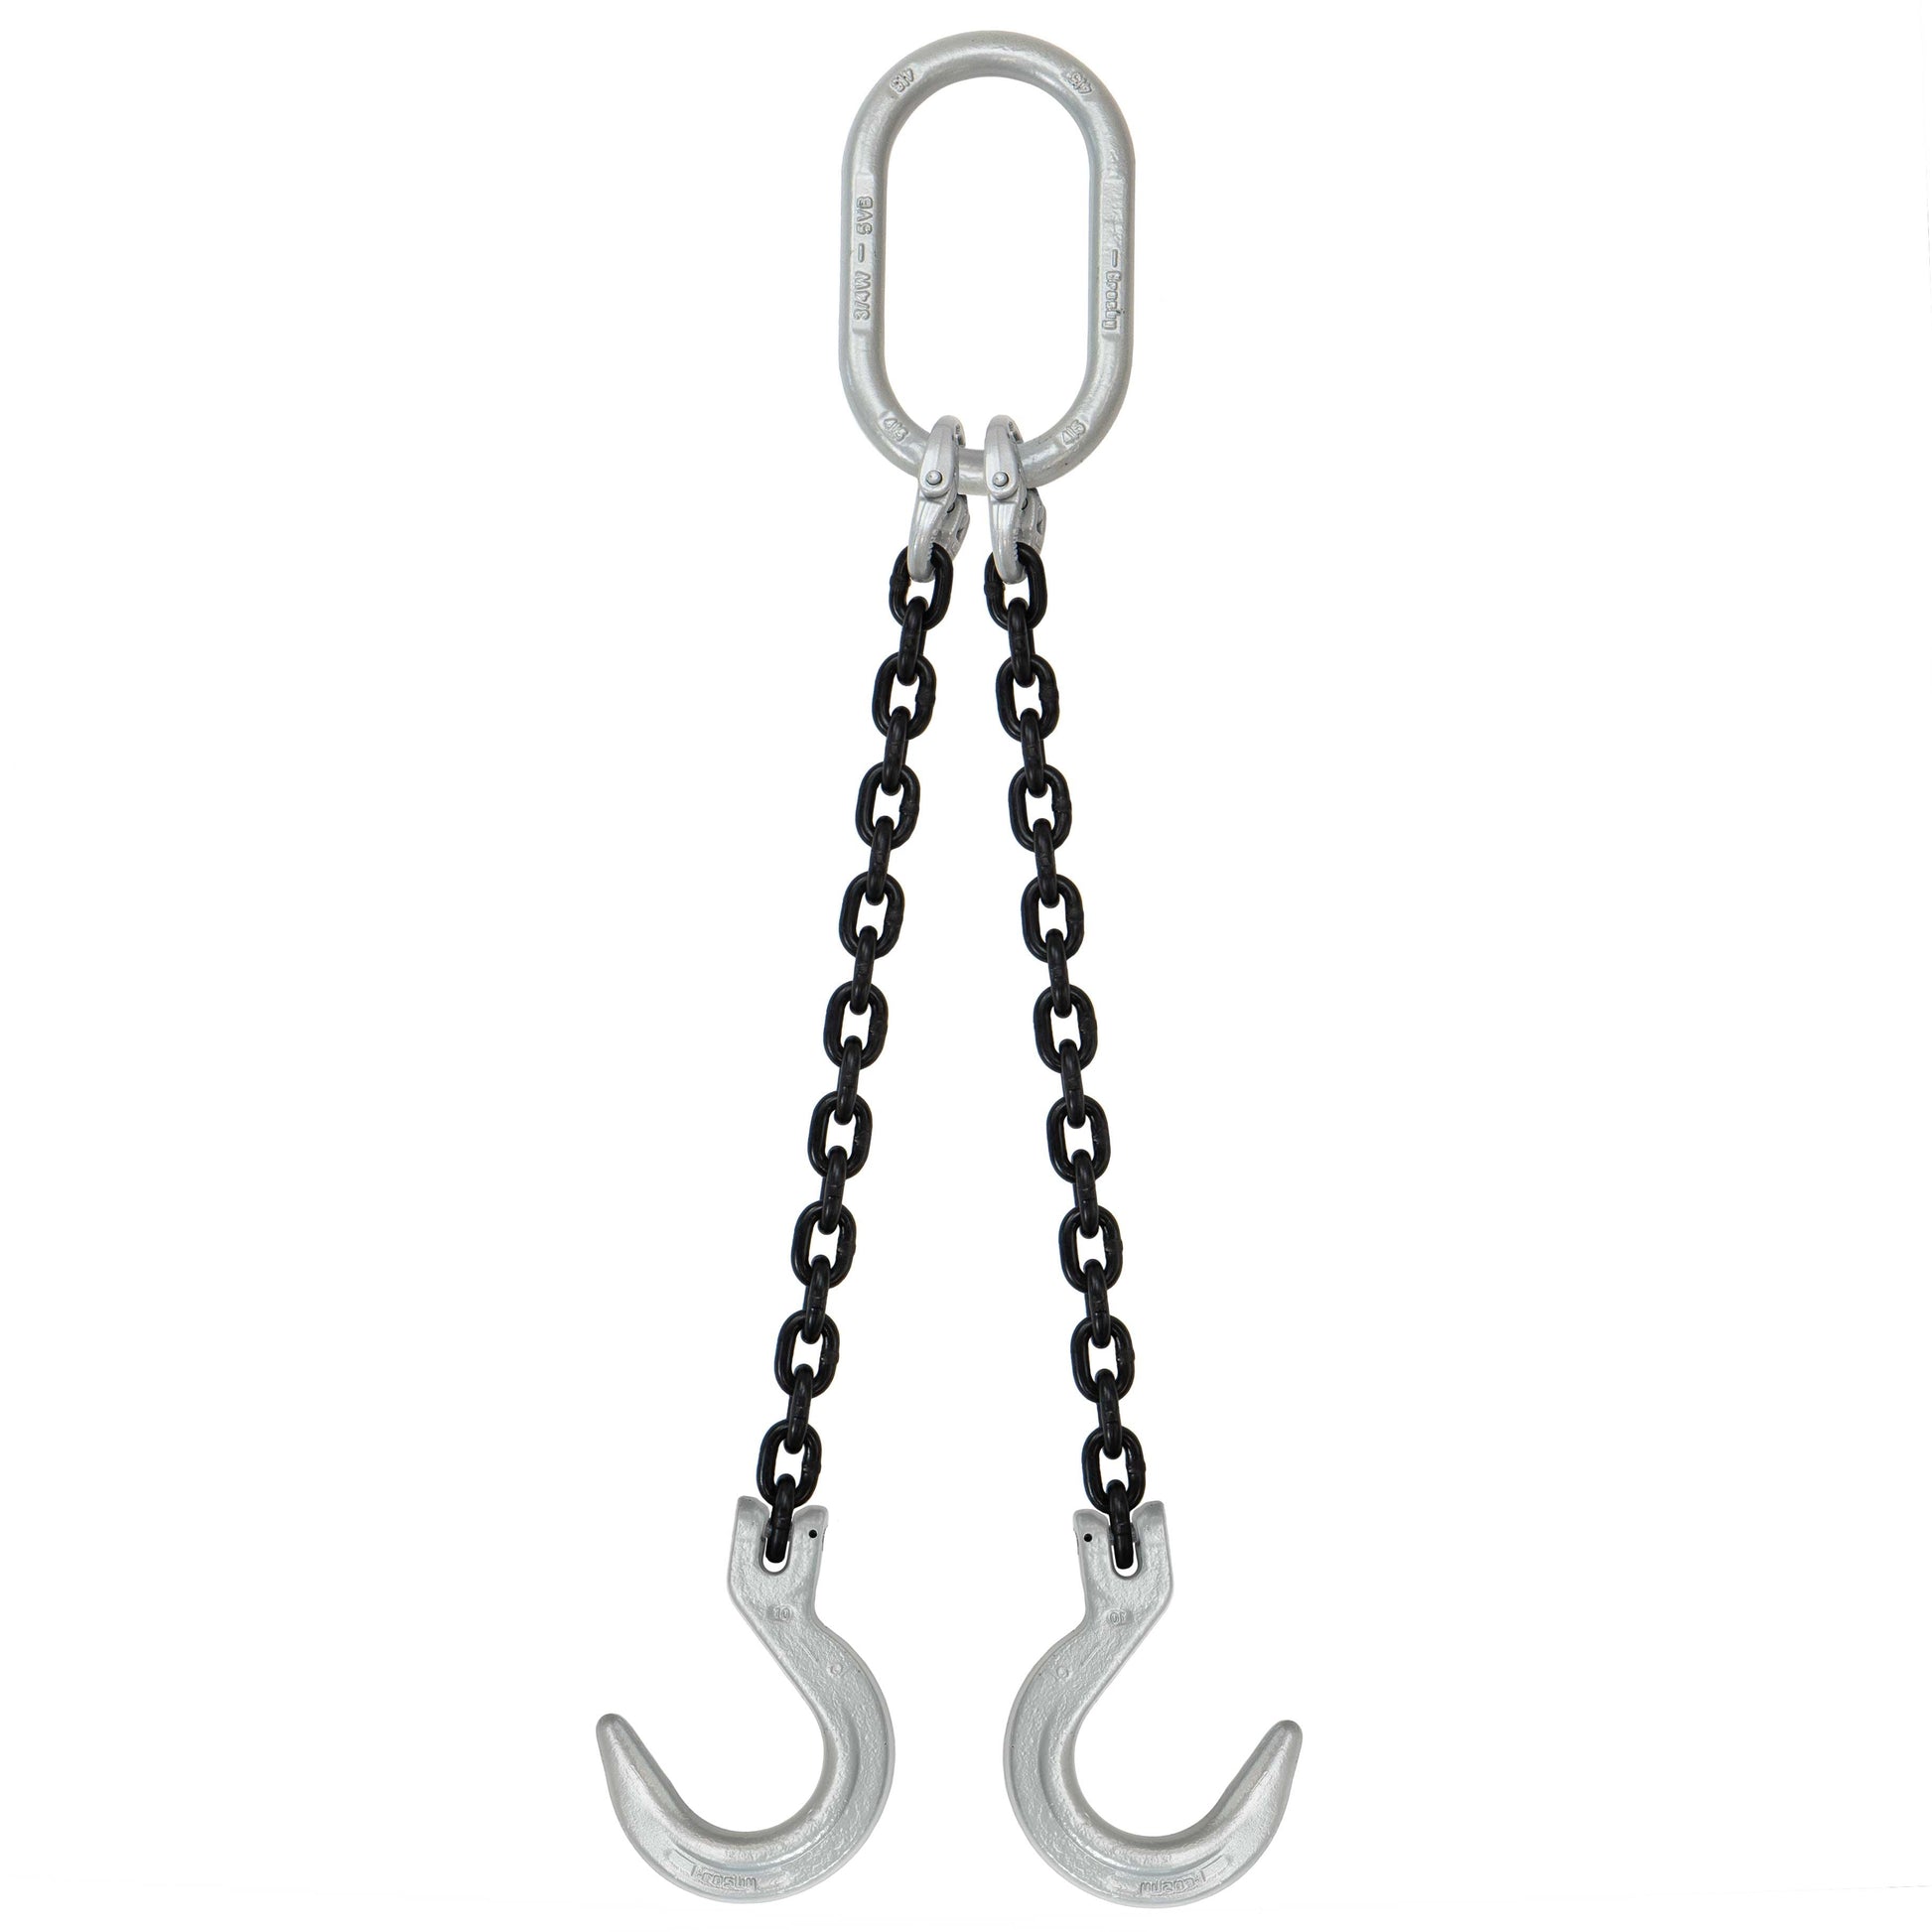 12 inch x 12 foot Domestic 2 Leg Chain Sling w Crosby Foundry Hooks Grade 100 image 1 of 2